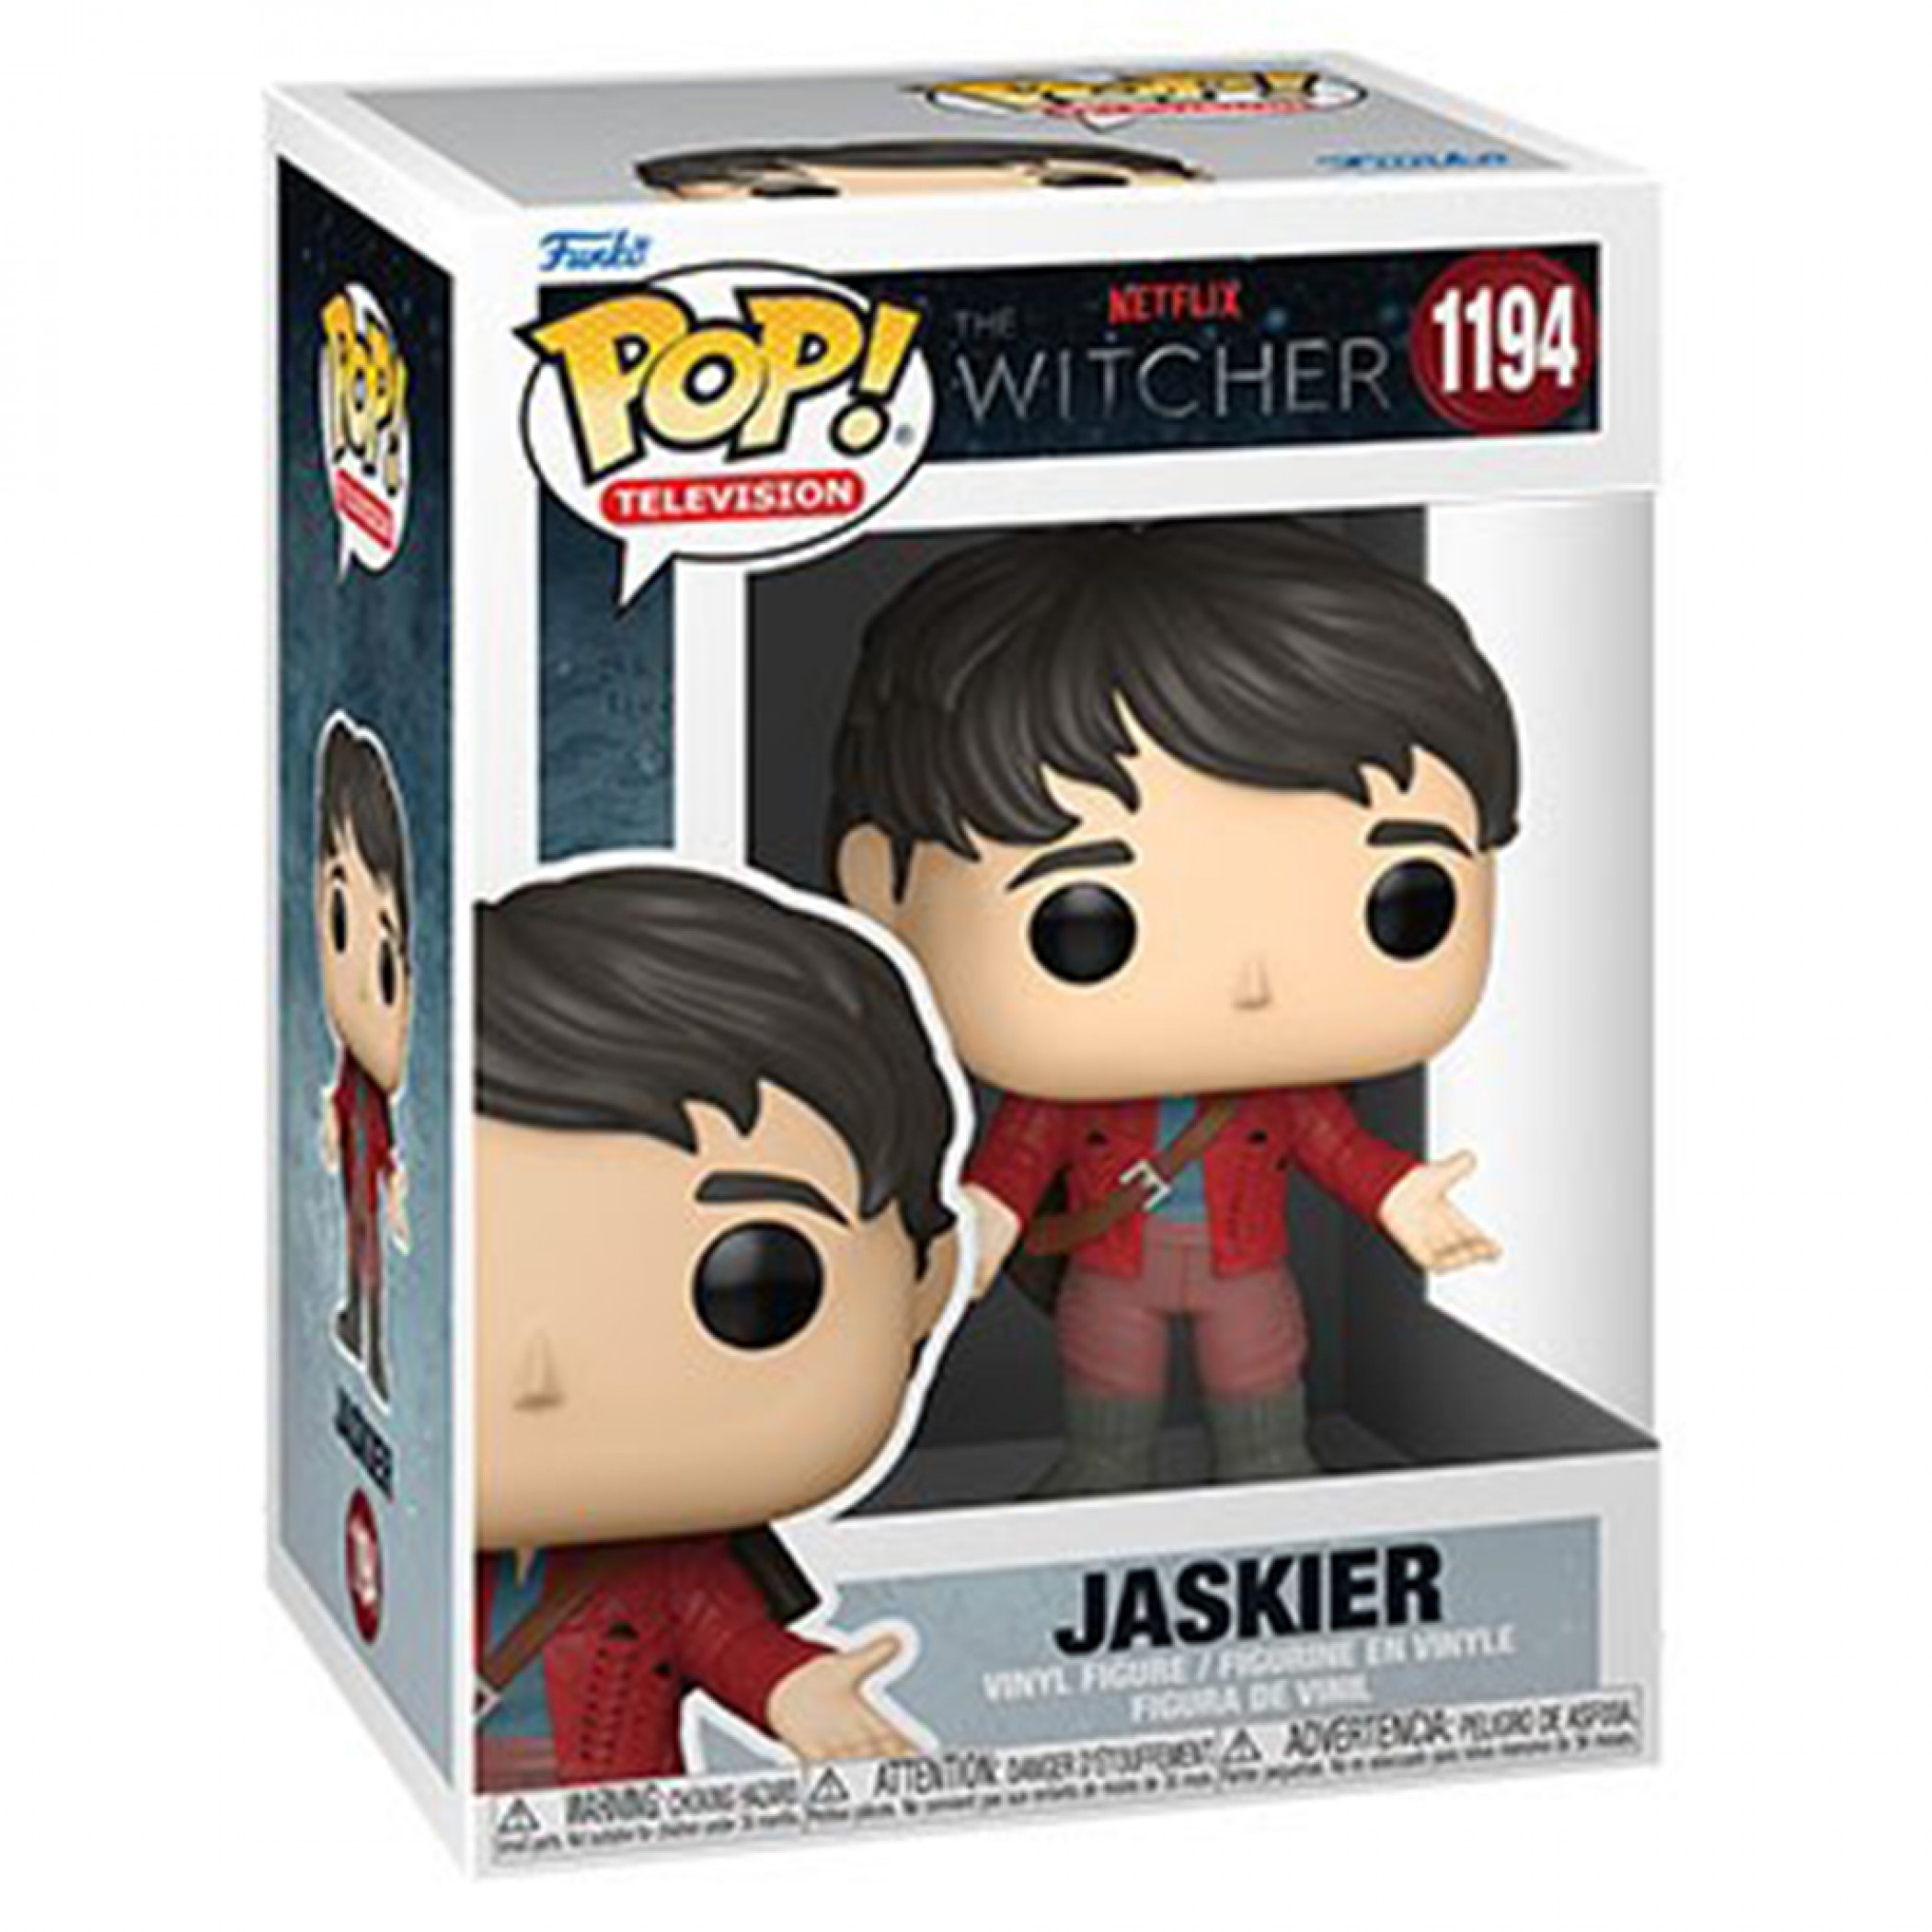 The Witcher Series Jaskier in Red Outfit Funko Pop! Vinyl Figure